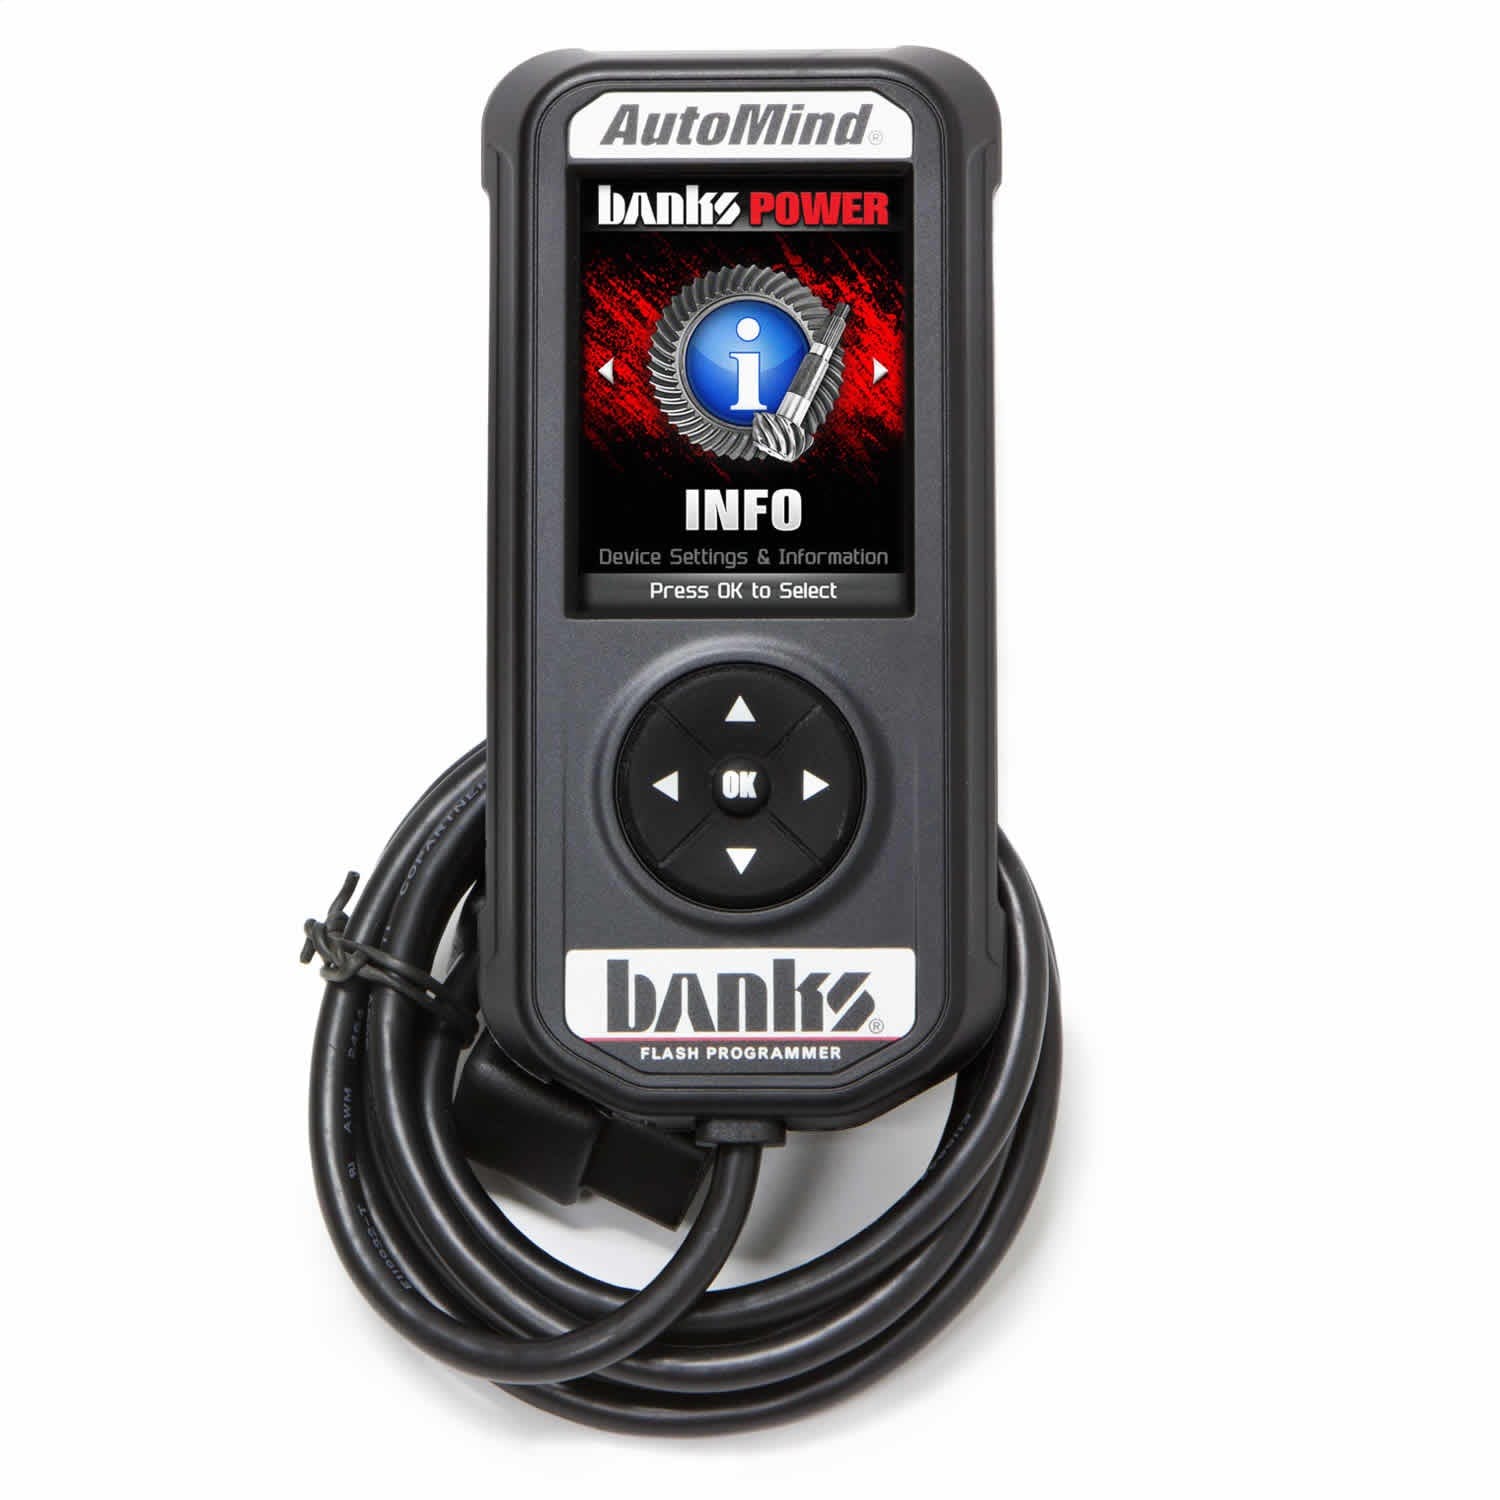 Banks Power 66410 AutoMind® 2 Programmer